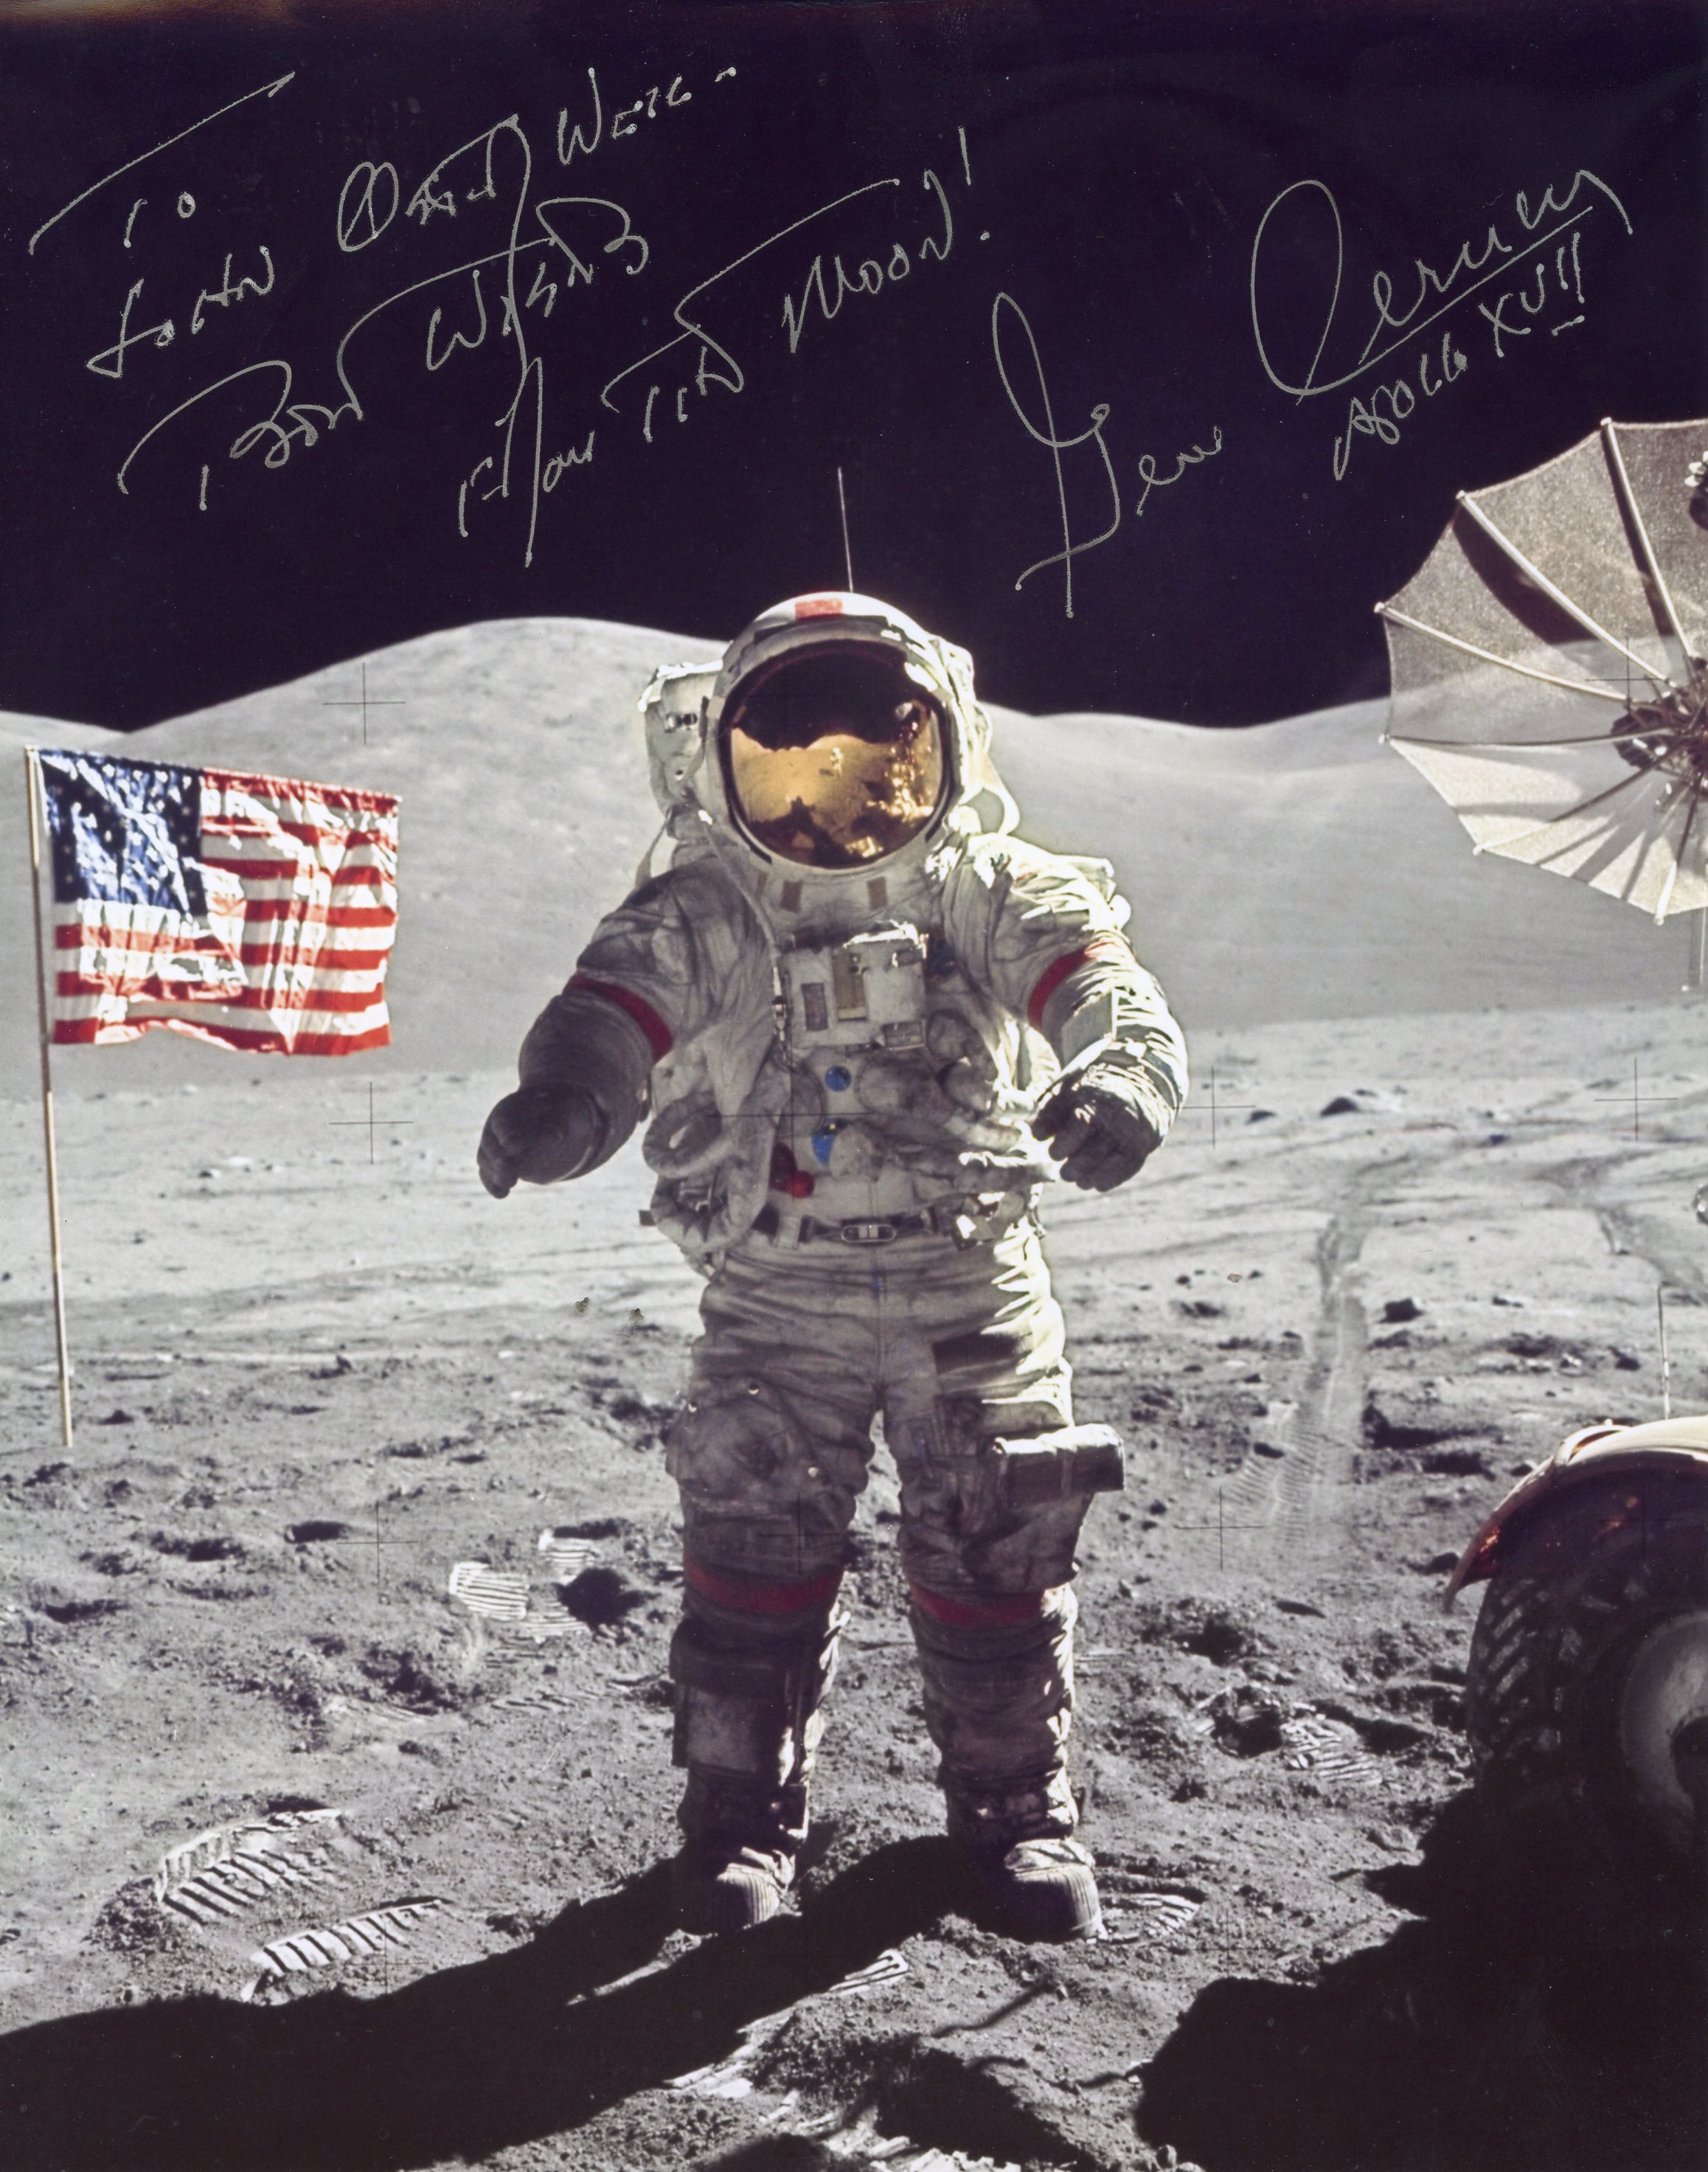 Eugene Cernan, the Last Man on the Moon recognizes John Osterweil for all his work with charitable causes.